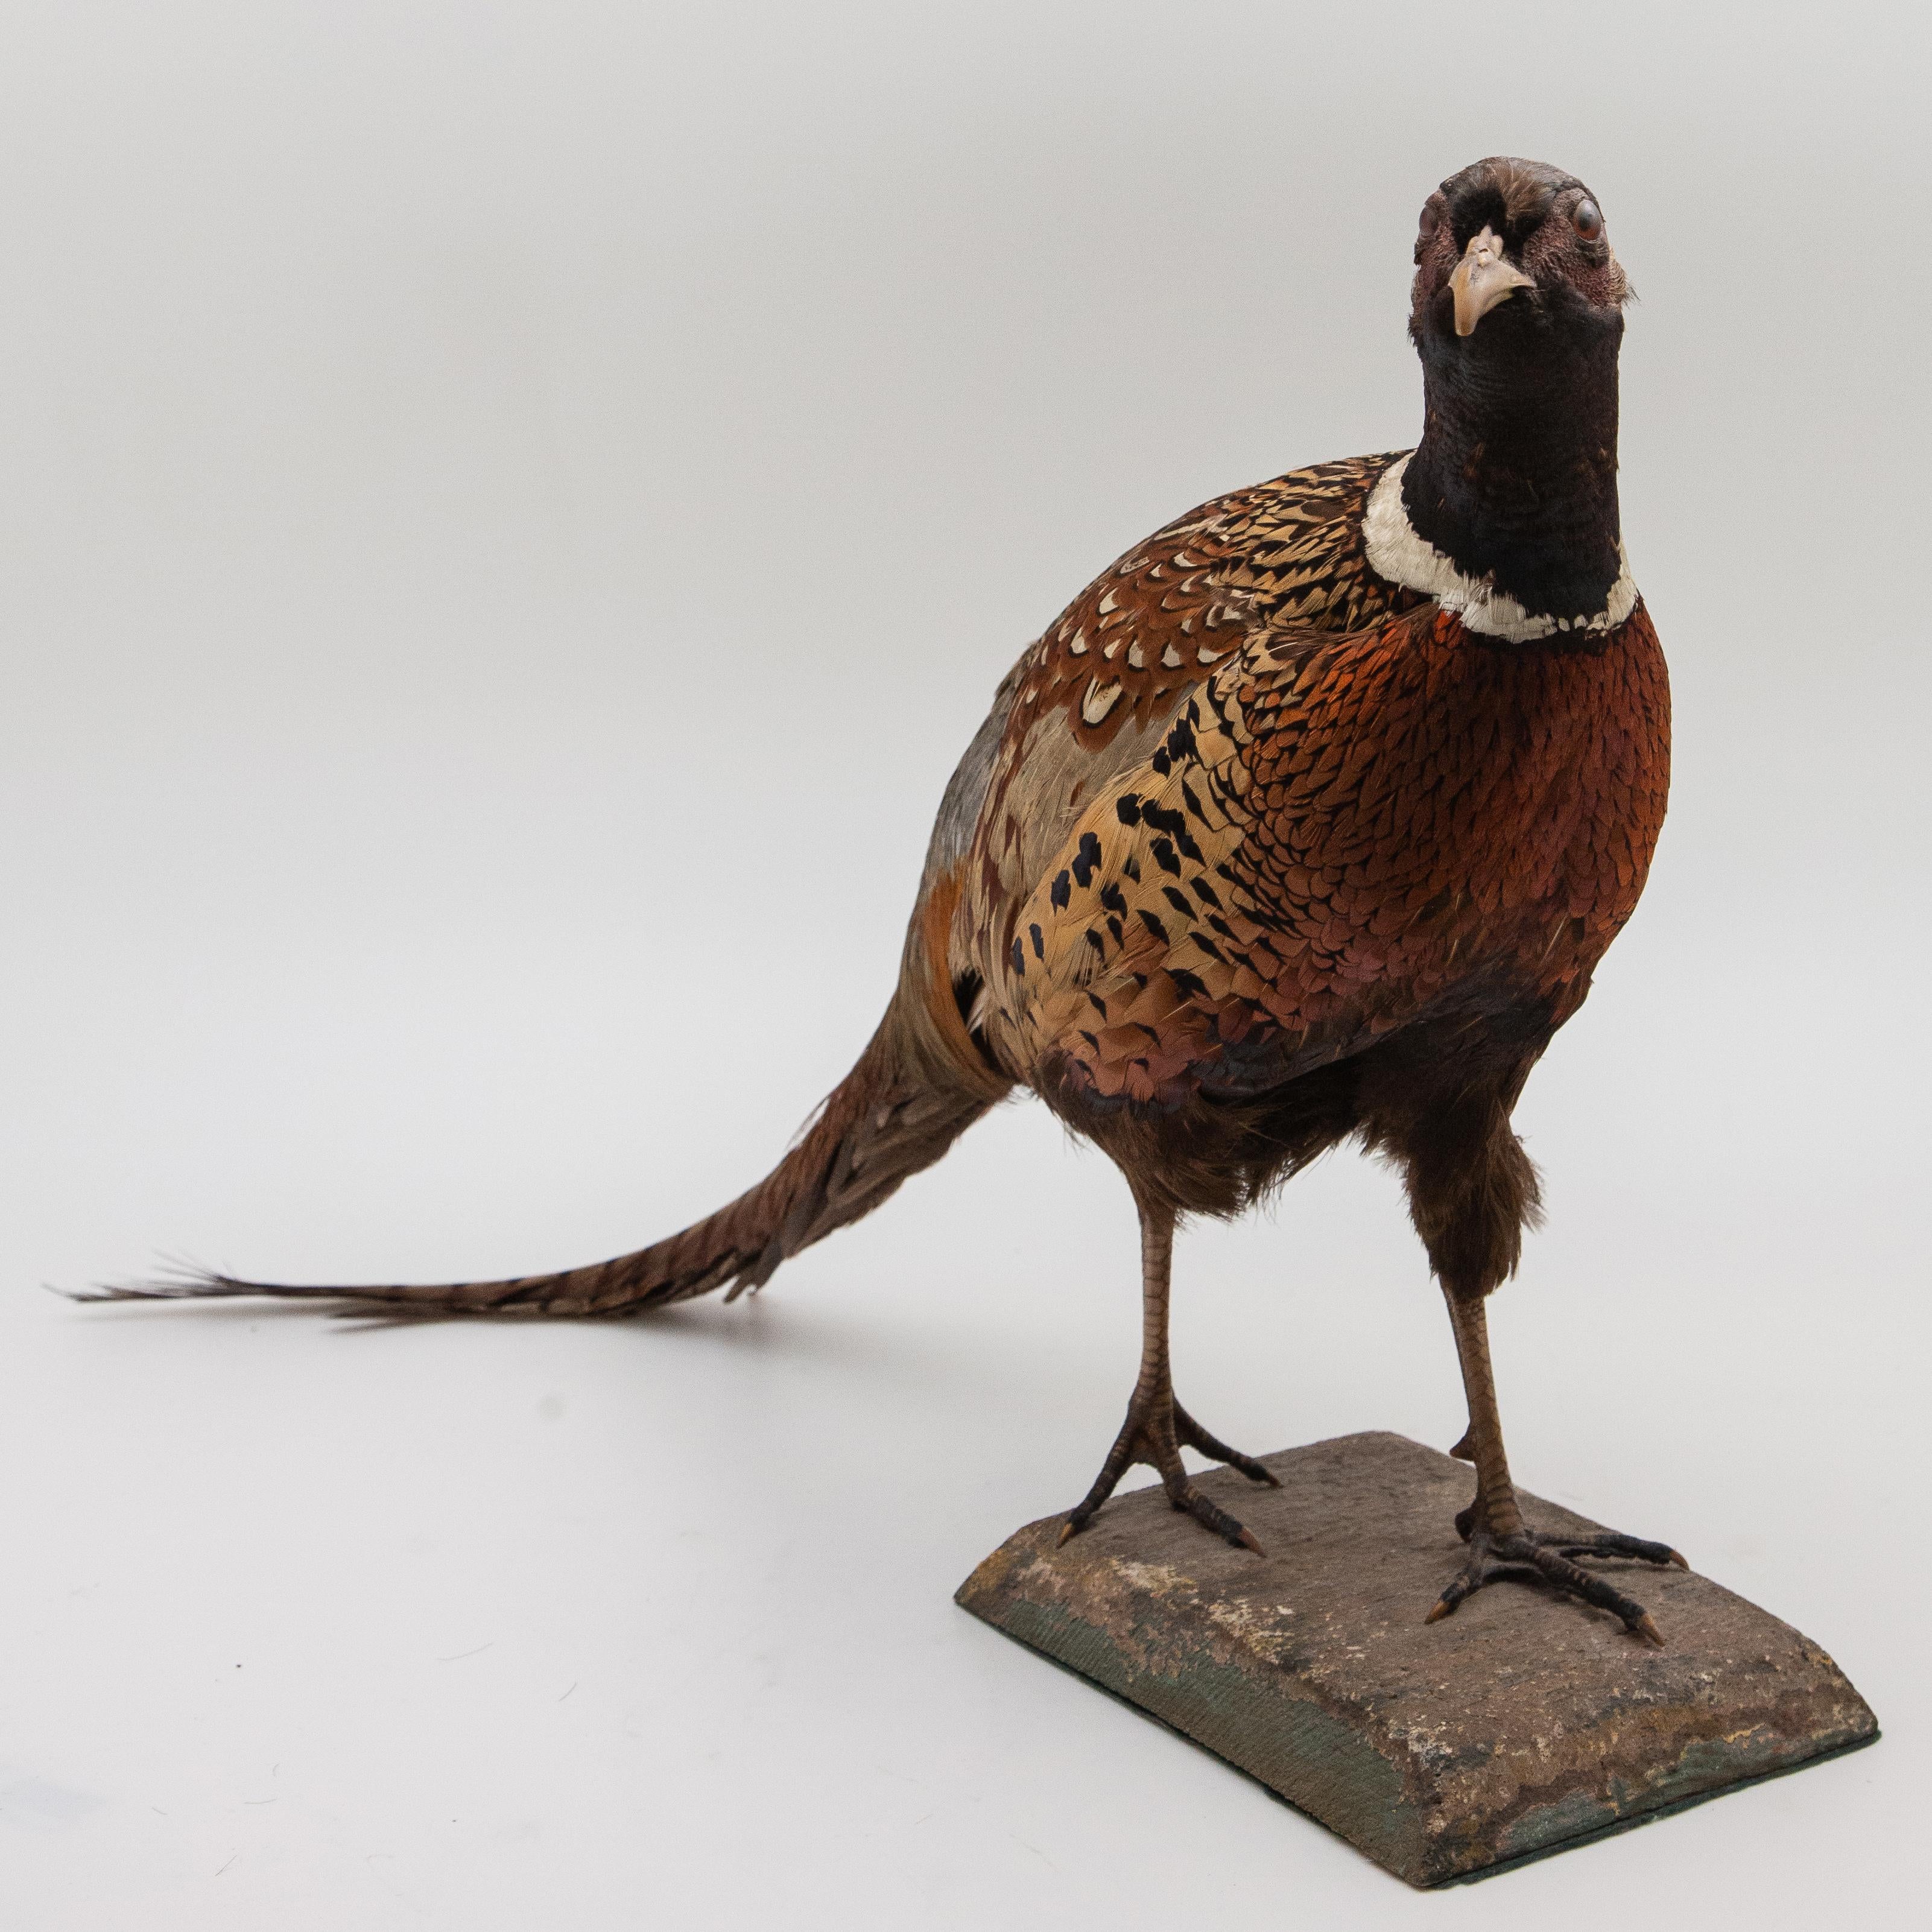 Taxidermy Ringneck pheasant. Antique taxidermy pheasant mounted on green base.

Size: 15